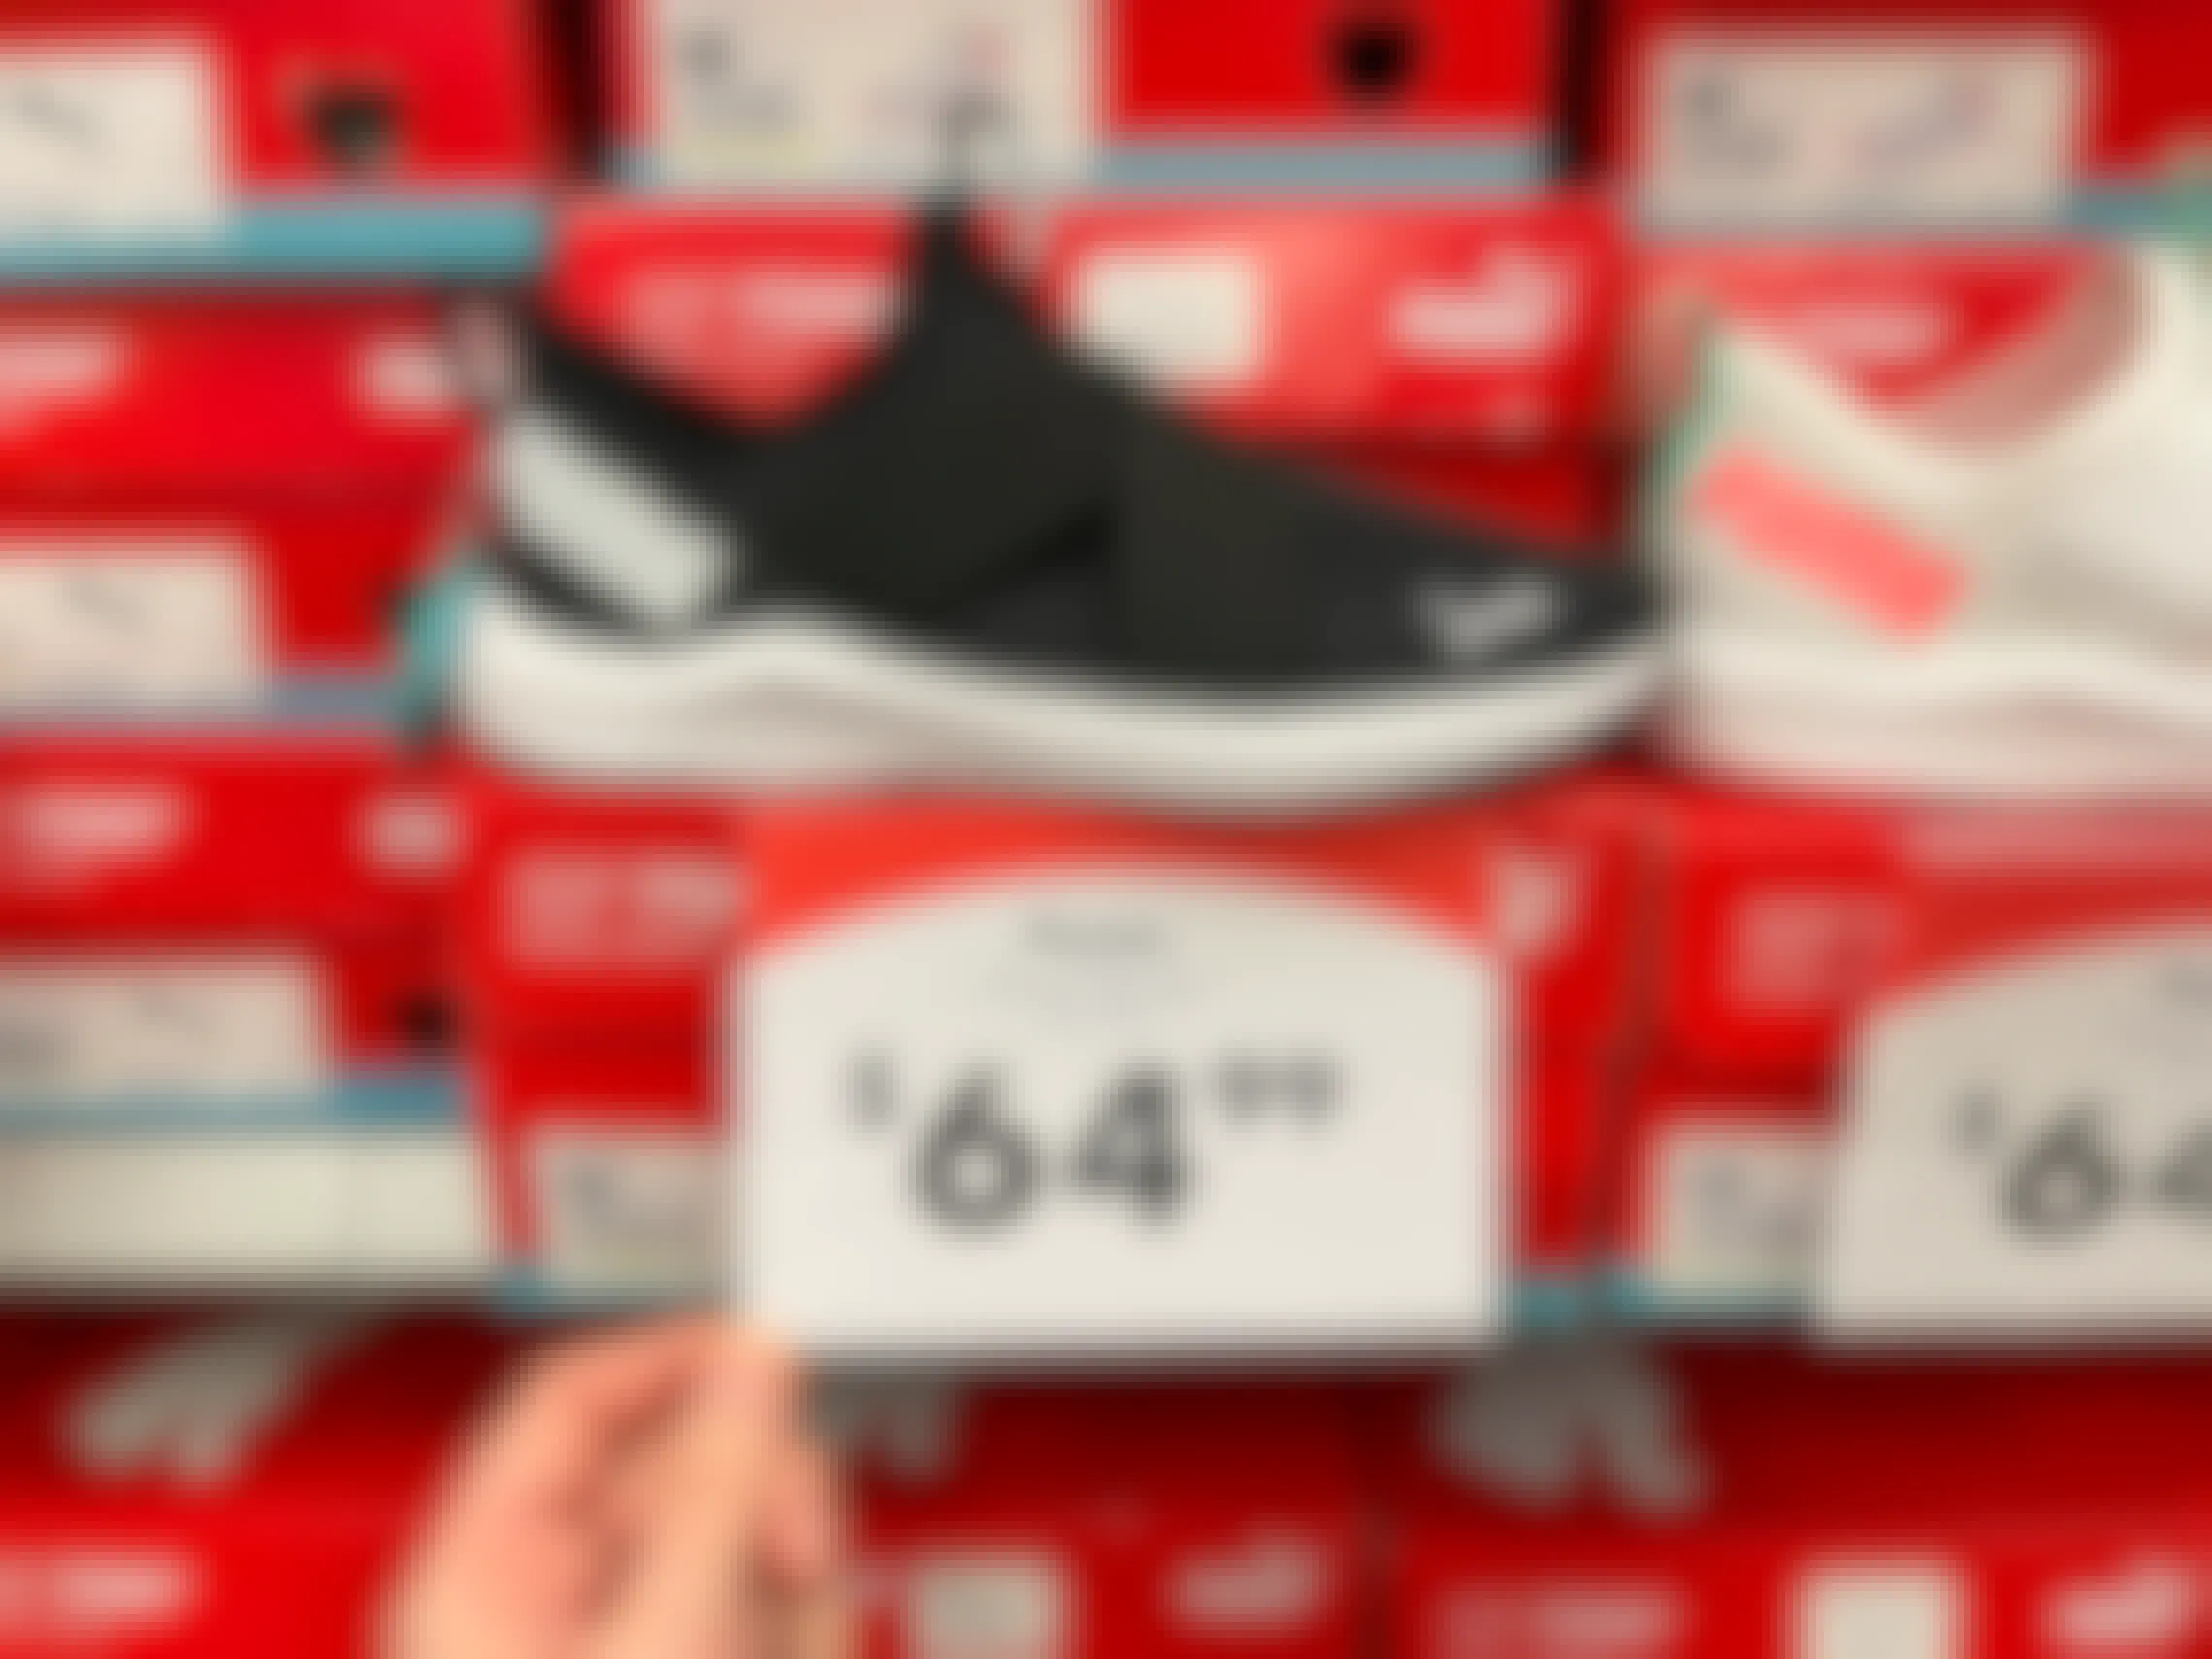 A pair of Puma running shoes on a shelf with shoe boxes and a price tag reading, "$64.99".